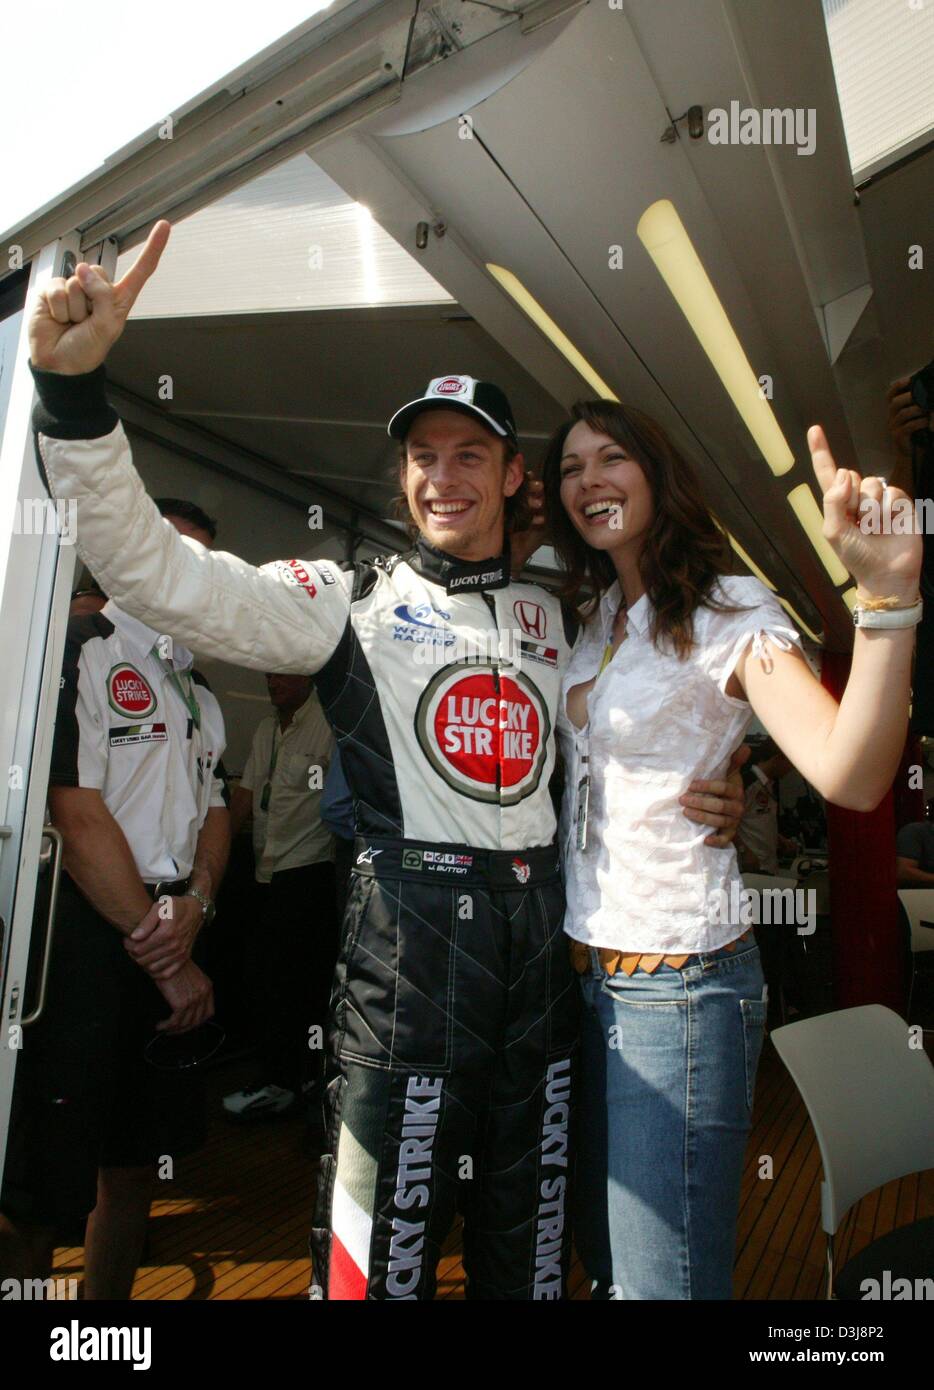 (dpa) - English Formula One pilot Jenson Button (Team BAR-Honda) smiles and celebrates with his girlfriend Louise Griffiths (R) after winning his first ever pole position at the San Marino Grand Prix in Imola, Italy, 24 April 2004. He would finish the race in second place a day later. Stock Photo